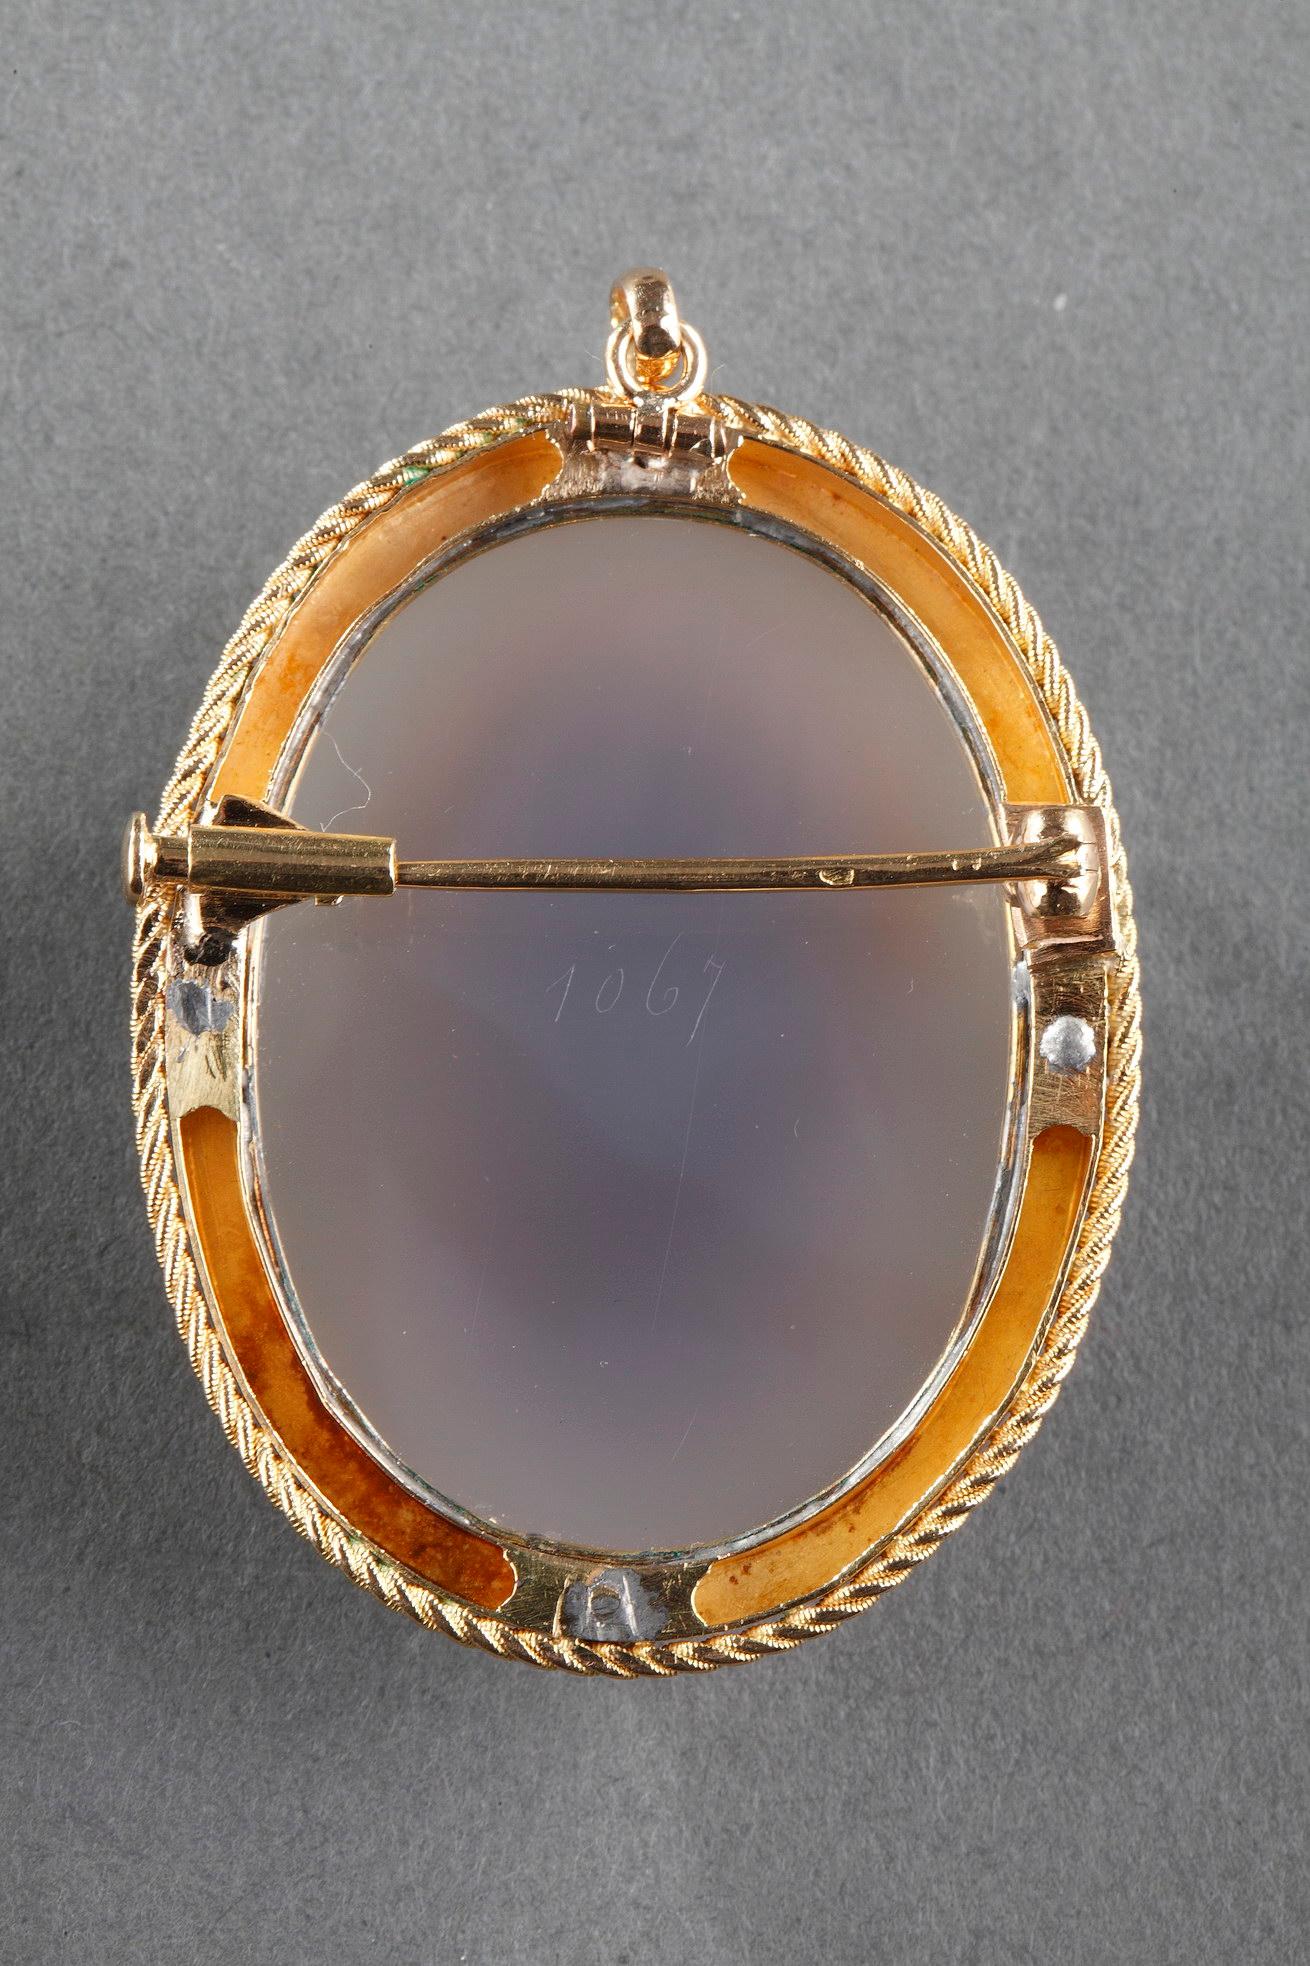 Mid-19th Century Gold Brooch-Pendant with Agate Cameo For Sale 4